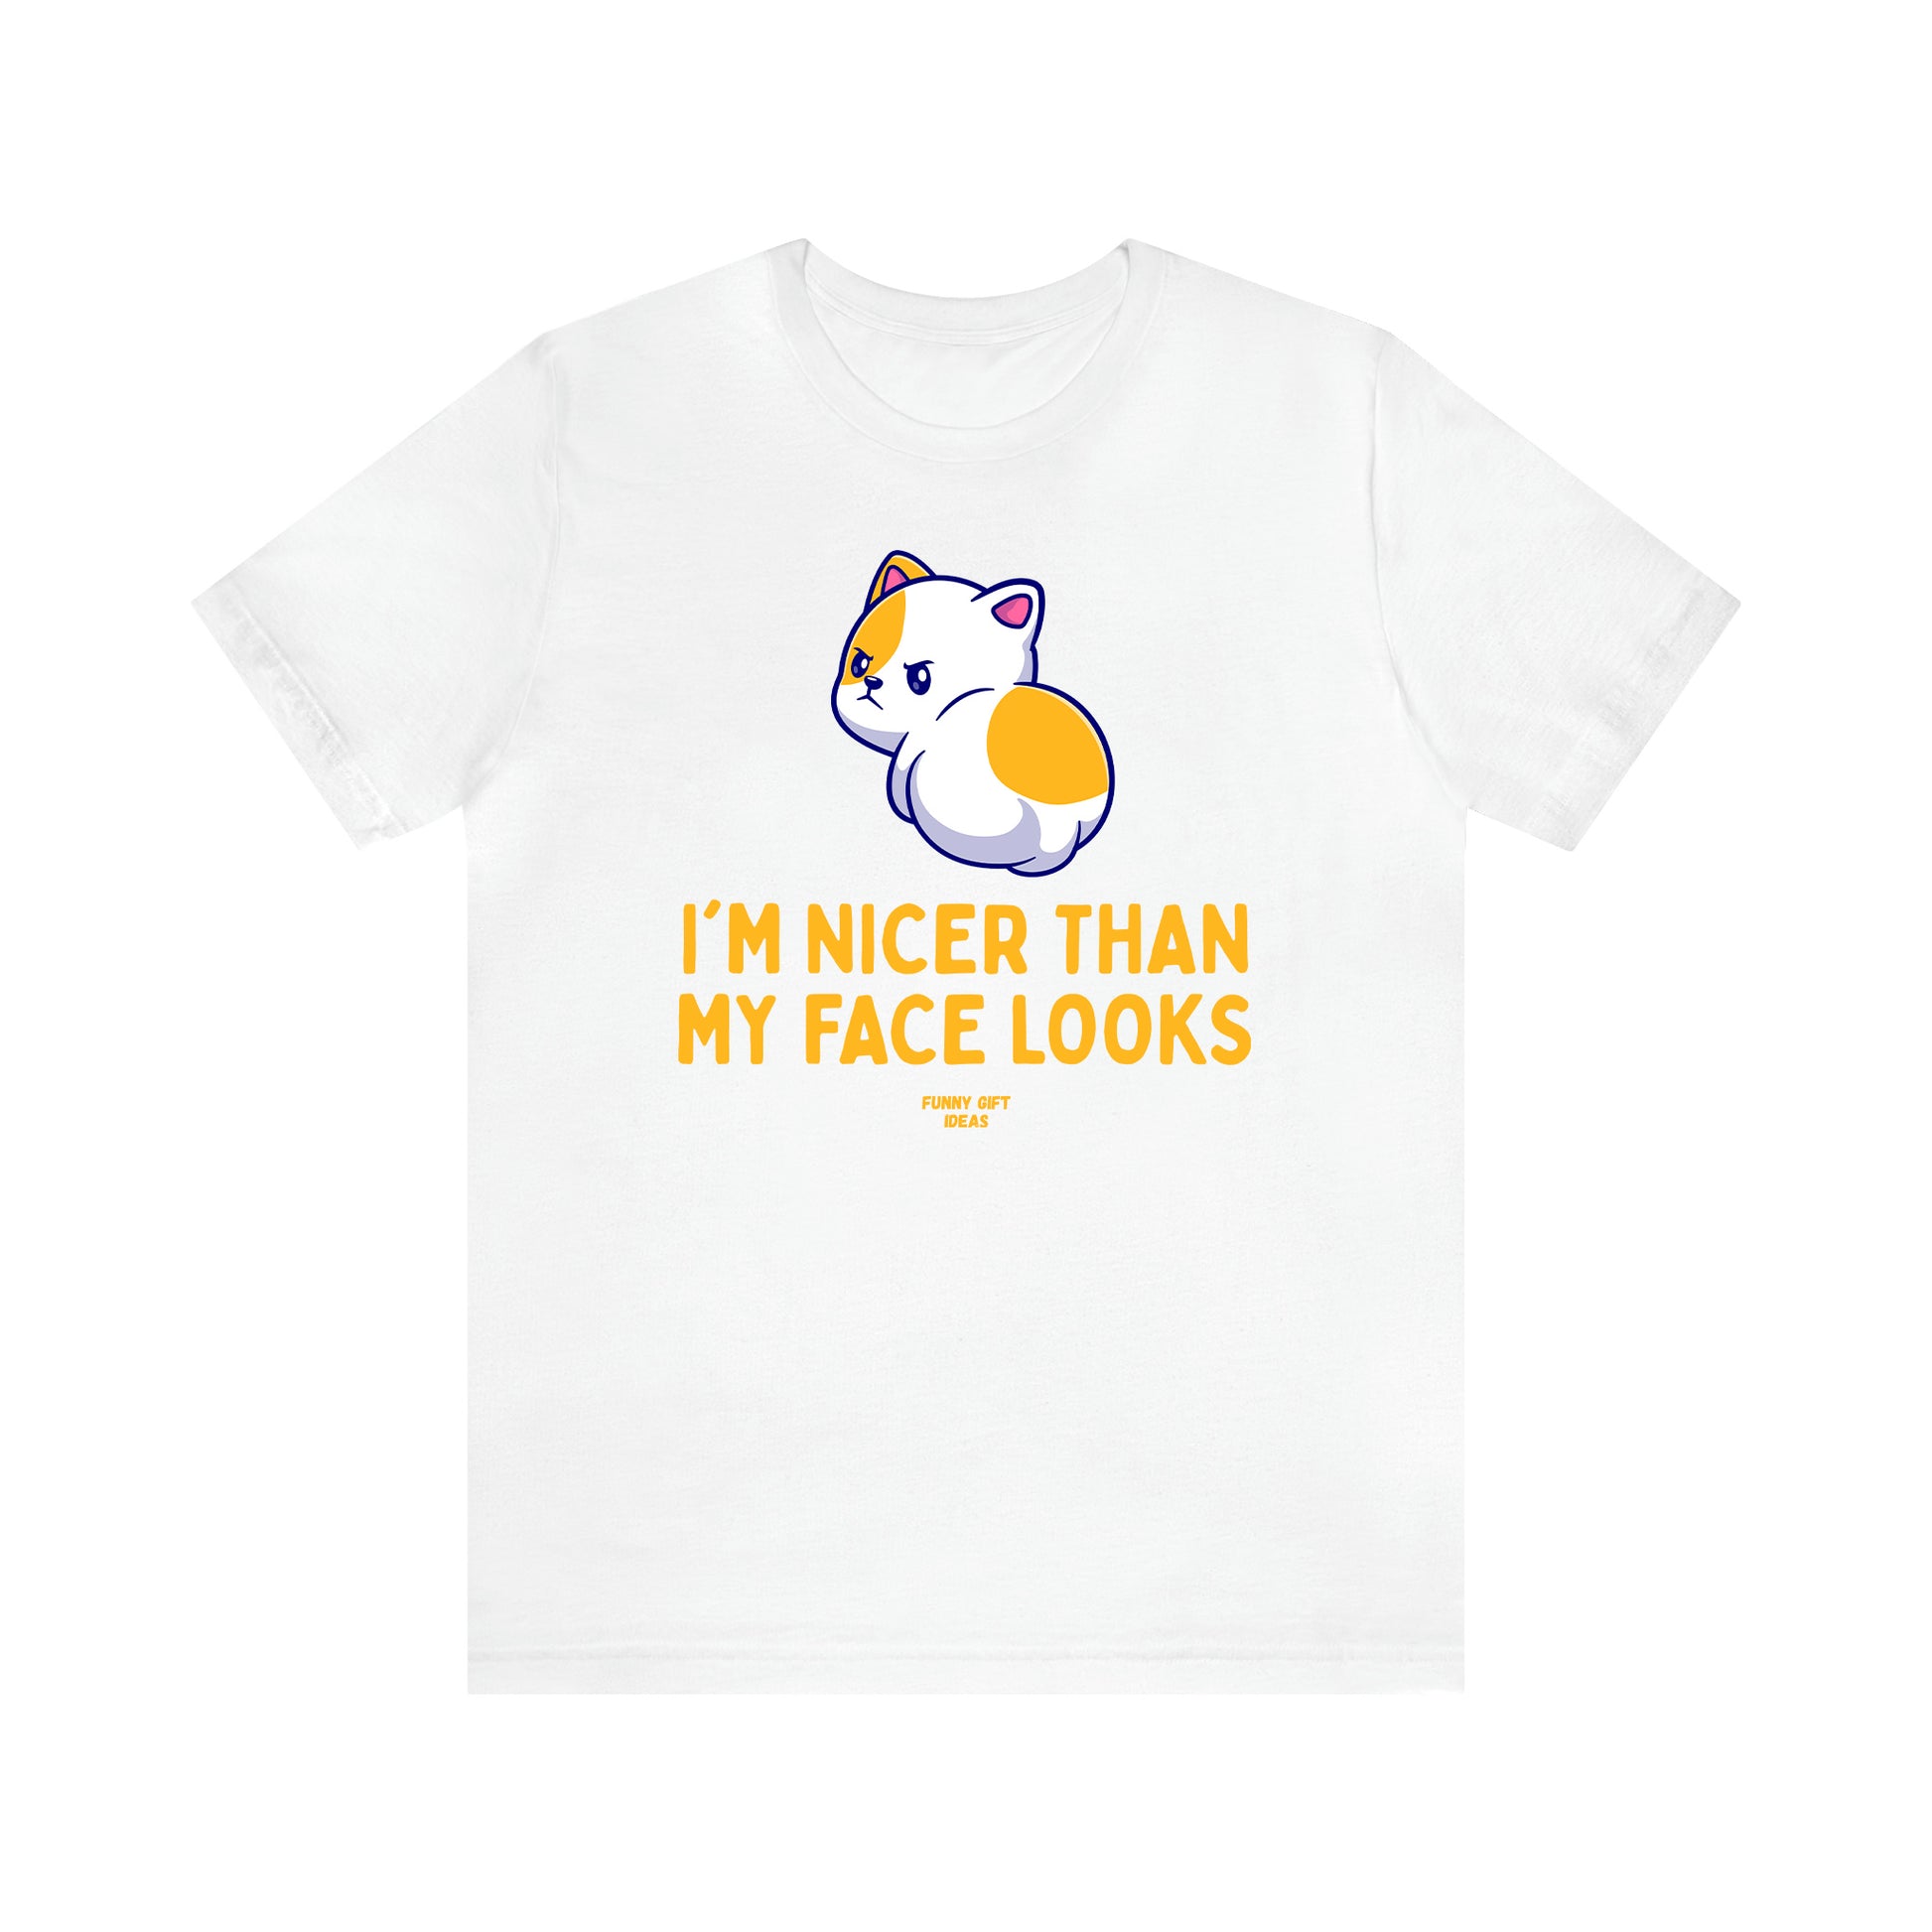 Women's T Shirts I'm Nicer Than My Face Looks - Funny Gift Ideas